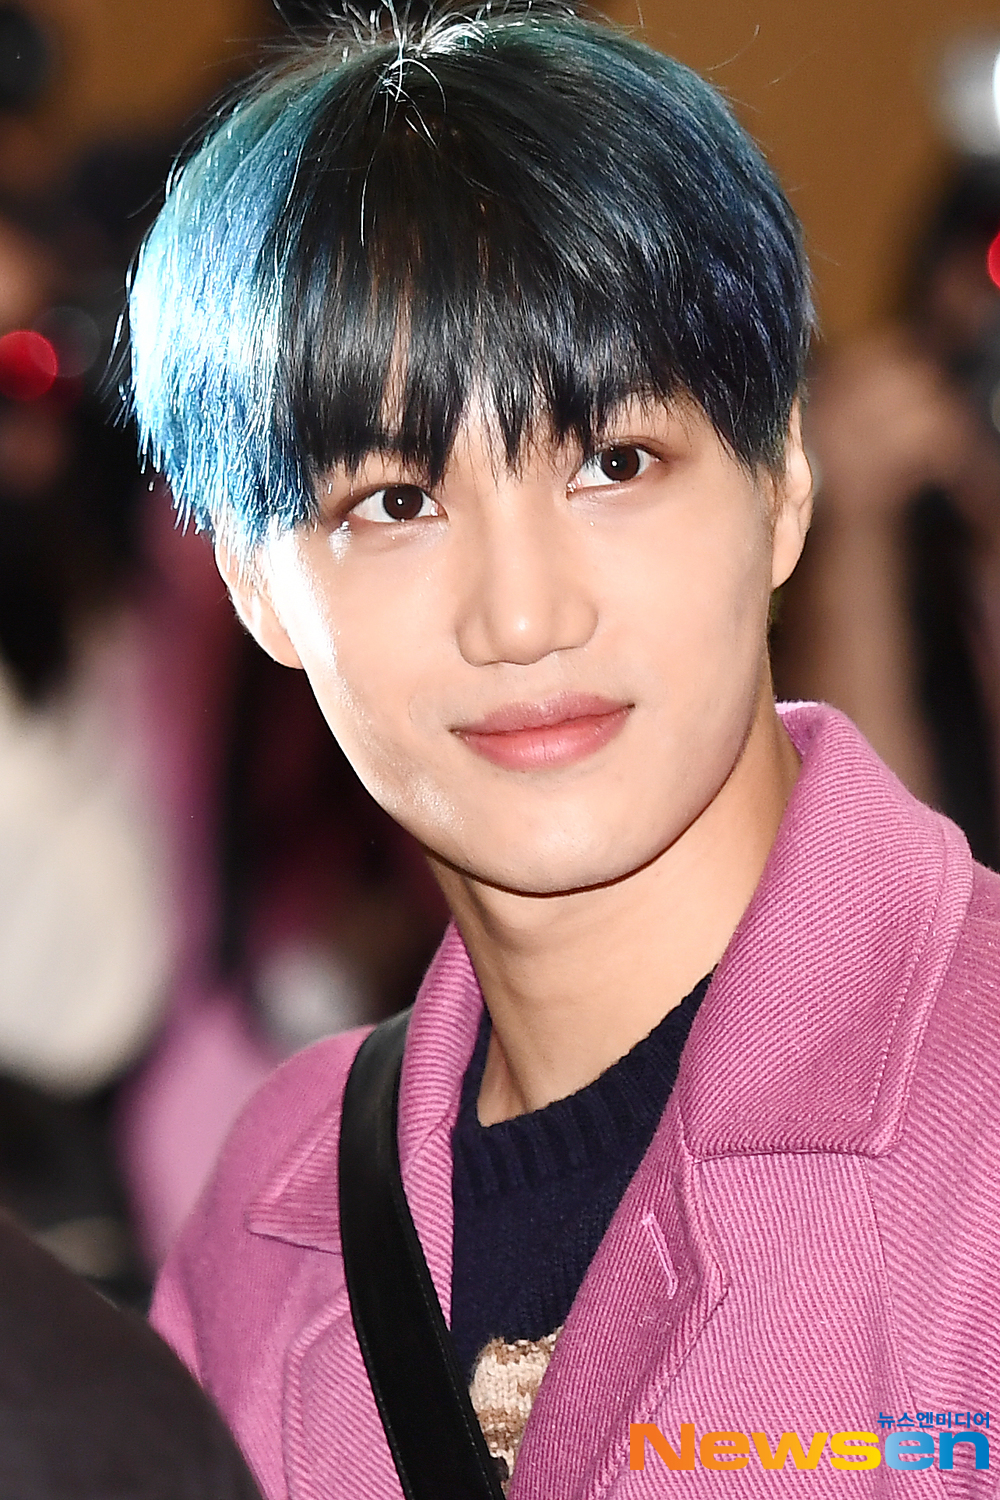 <p>EXO(EXO) member, guardian, Chanyeol, Kai, background, Sehun, Chen 10 November 17 Afternoon Seoul Gangseo way car Gimpo International Airport through the ‘EXO PLANET #5 - EXplOration - In Japan’ schedule to attend car Japan Osaka University the country had.</p><p>EXO(EXO) member, Kai with Japan Osaka University the country has.</p>